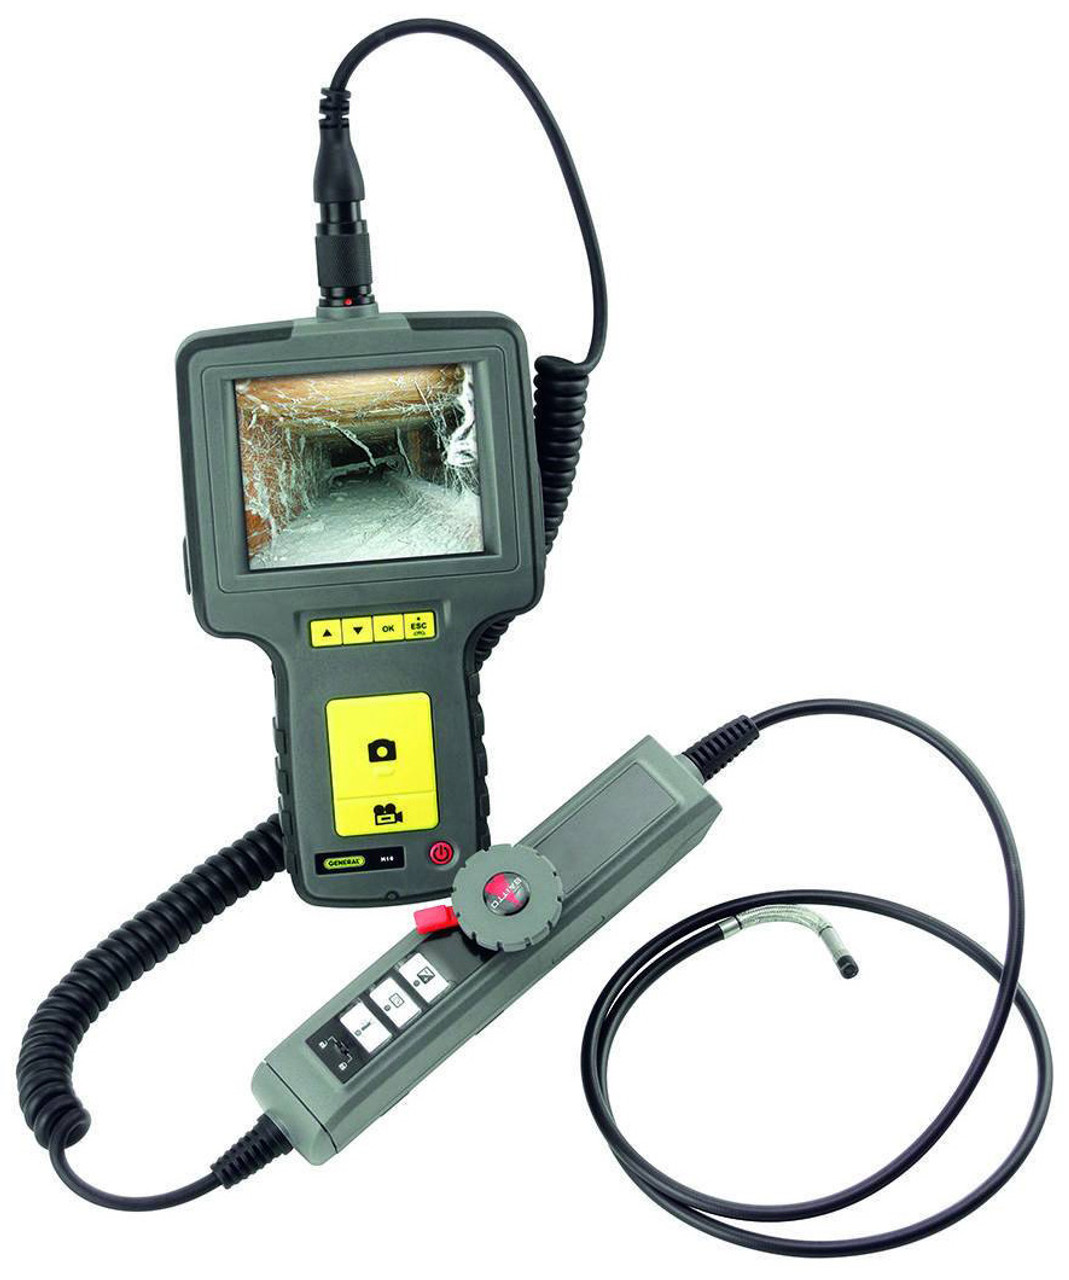 General Waterproof Video Inspection Camera/Borescope with 8mm Probe DCS600A